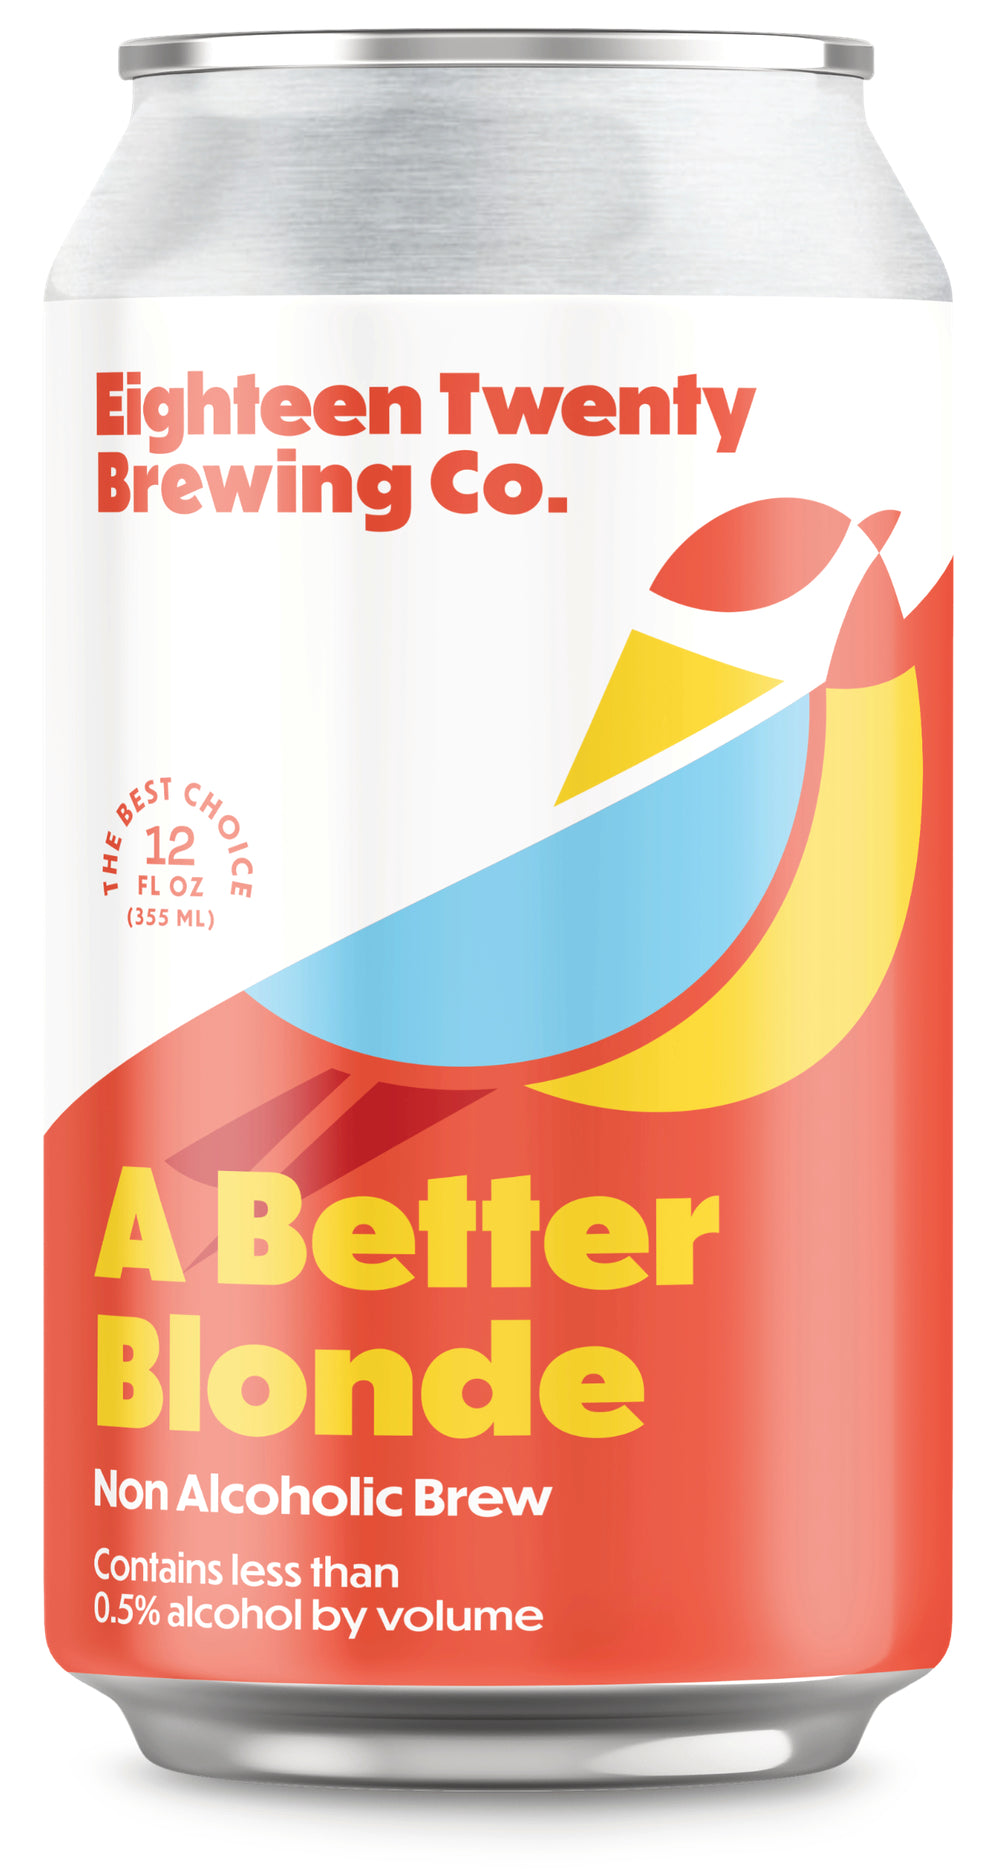 A Better Blonde Non Alcoholic Brew can